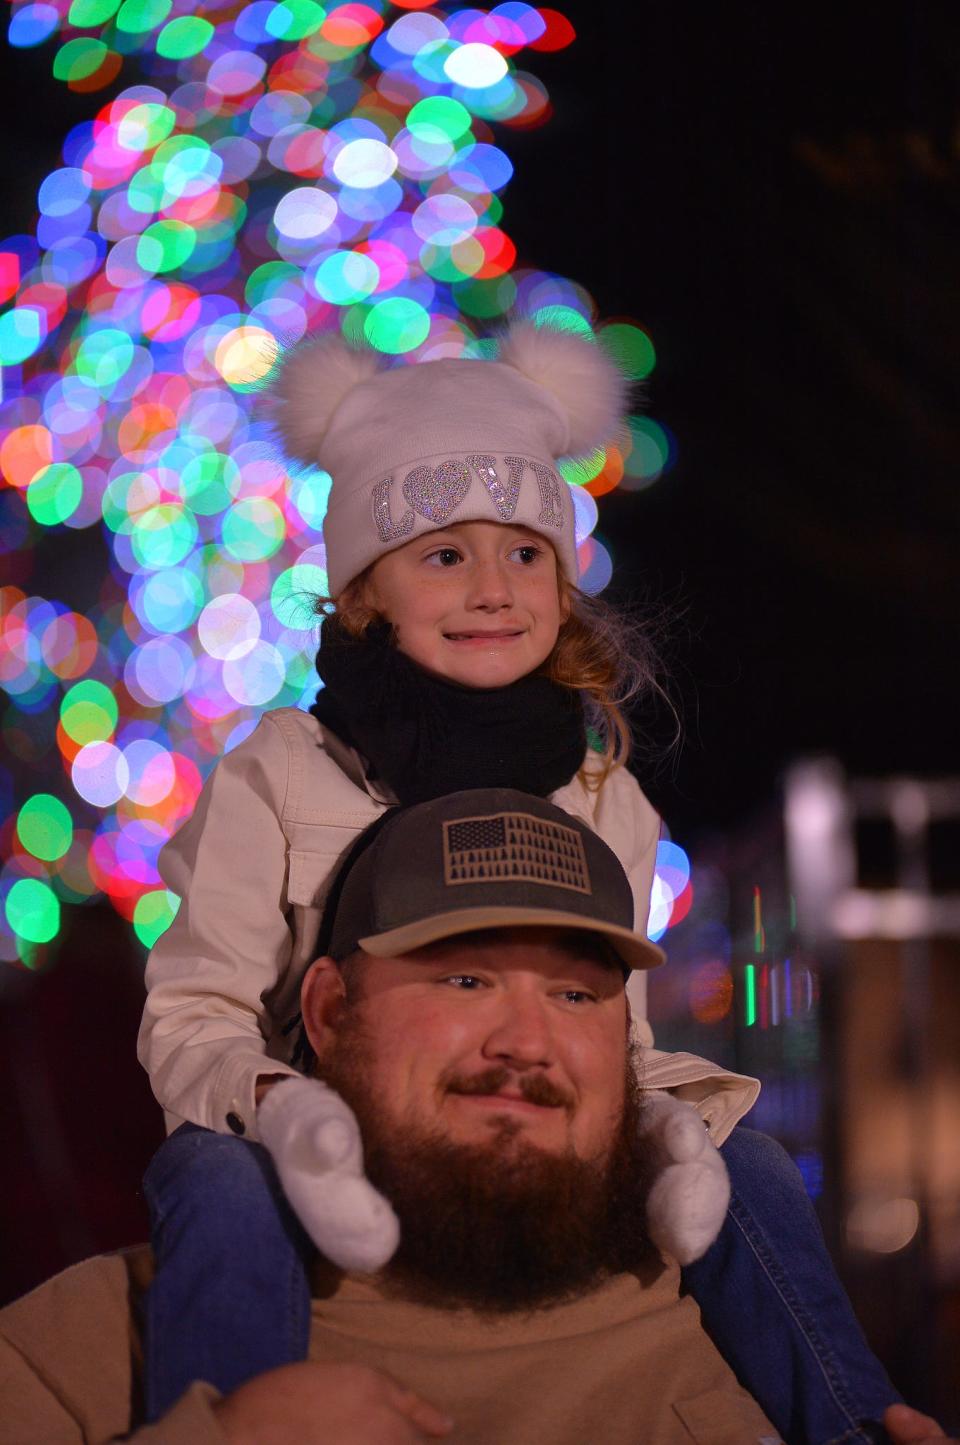 The City of Spartanburg held the 27th annual "A Dickens of a Christmas" in downtown Spartanburg, Tuesday evening, December 7, 2021. The victorian-themed holiday event included live Christmas music, window displays, horse-drawn carriage rides, and the lighting of the Christmas tree at Denny's Plaza. Holden Guffey holds his daughter Emma, 4, on his shoulders in front of the lit Christmas tree.